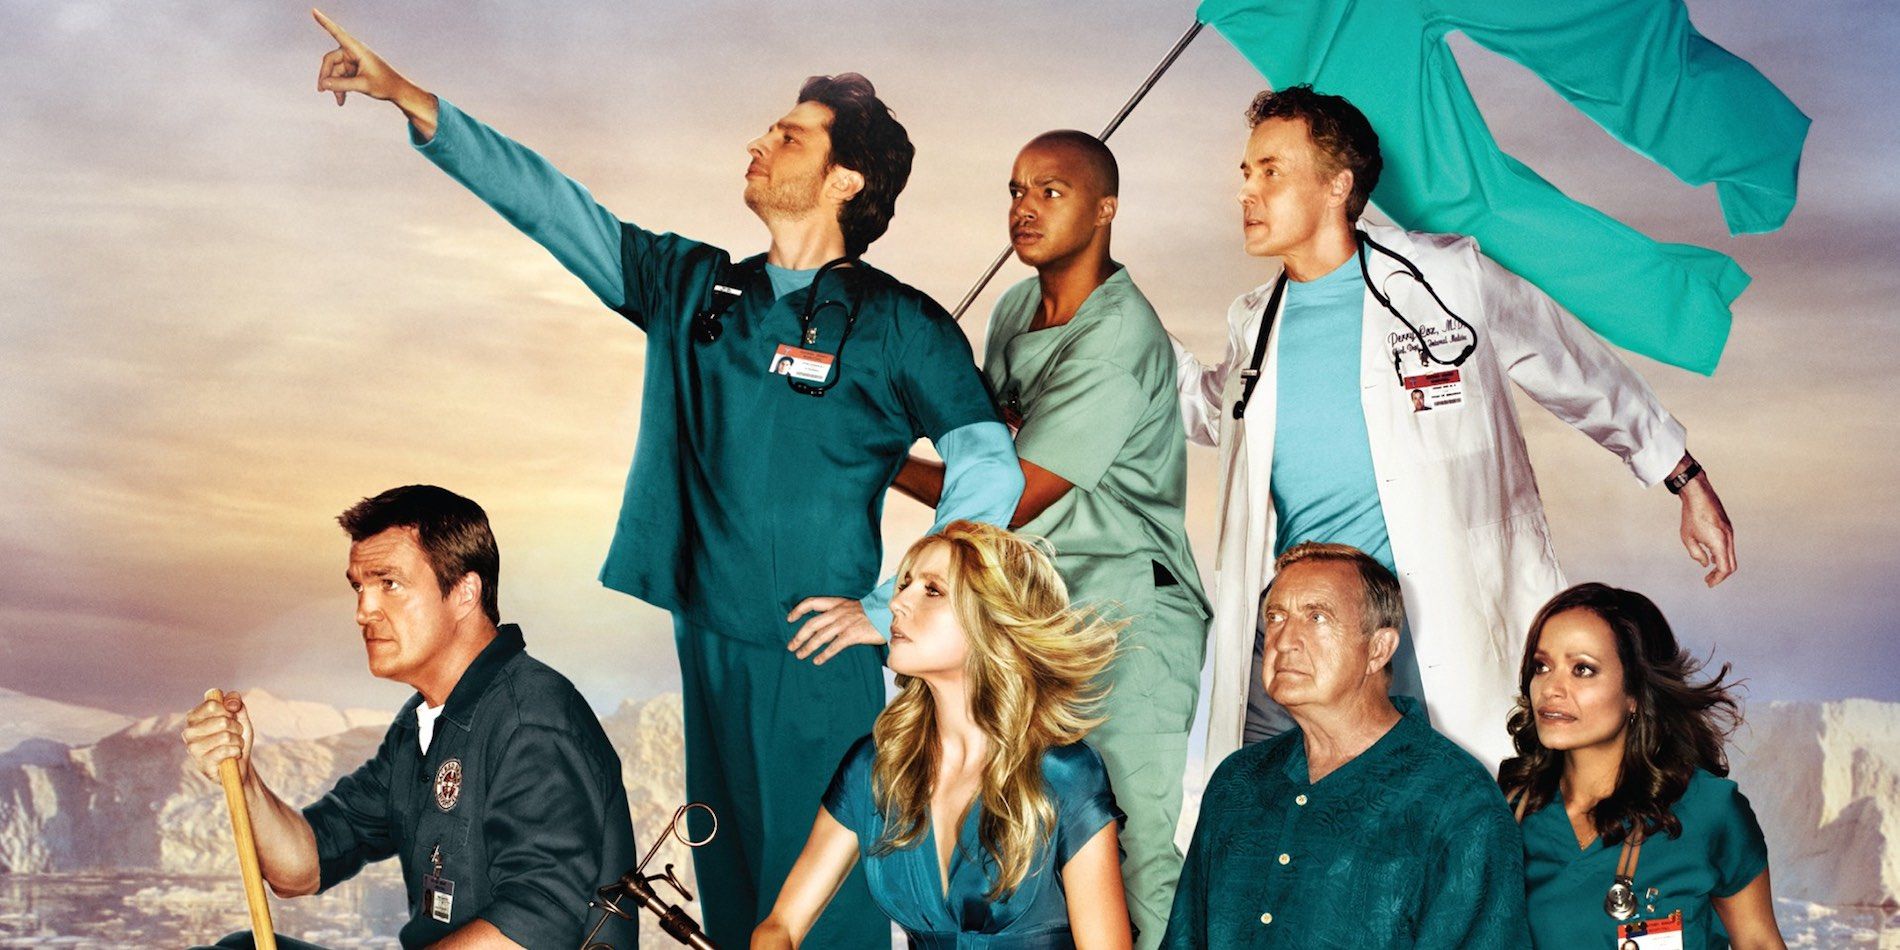 The Cast of Scrubs posing for a promotional photo